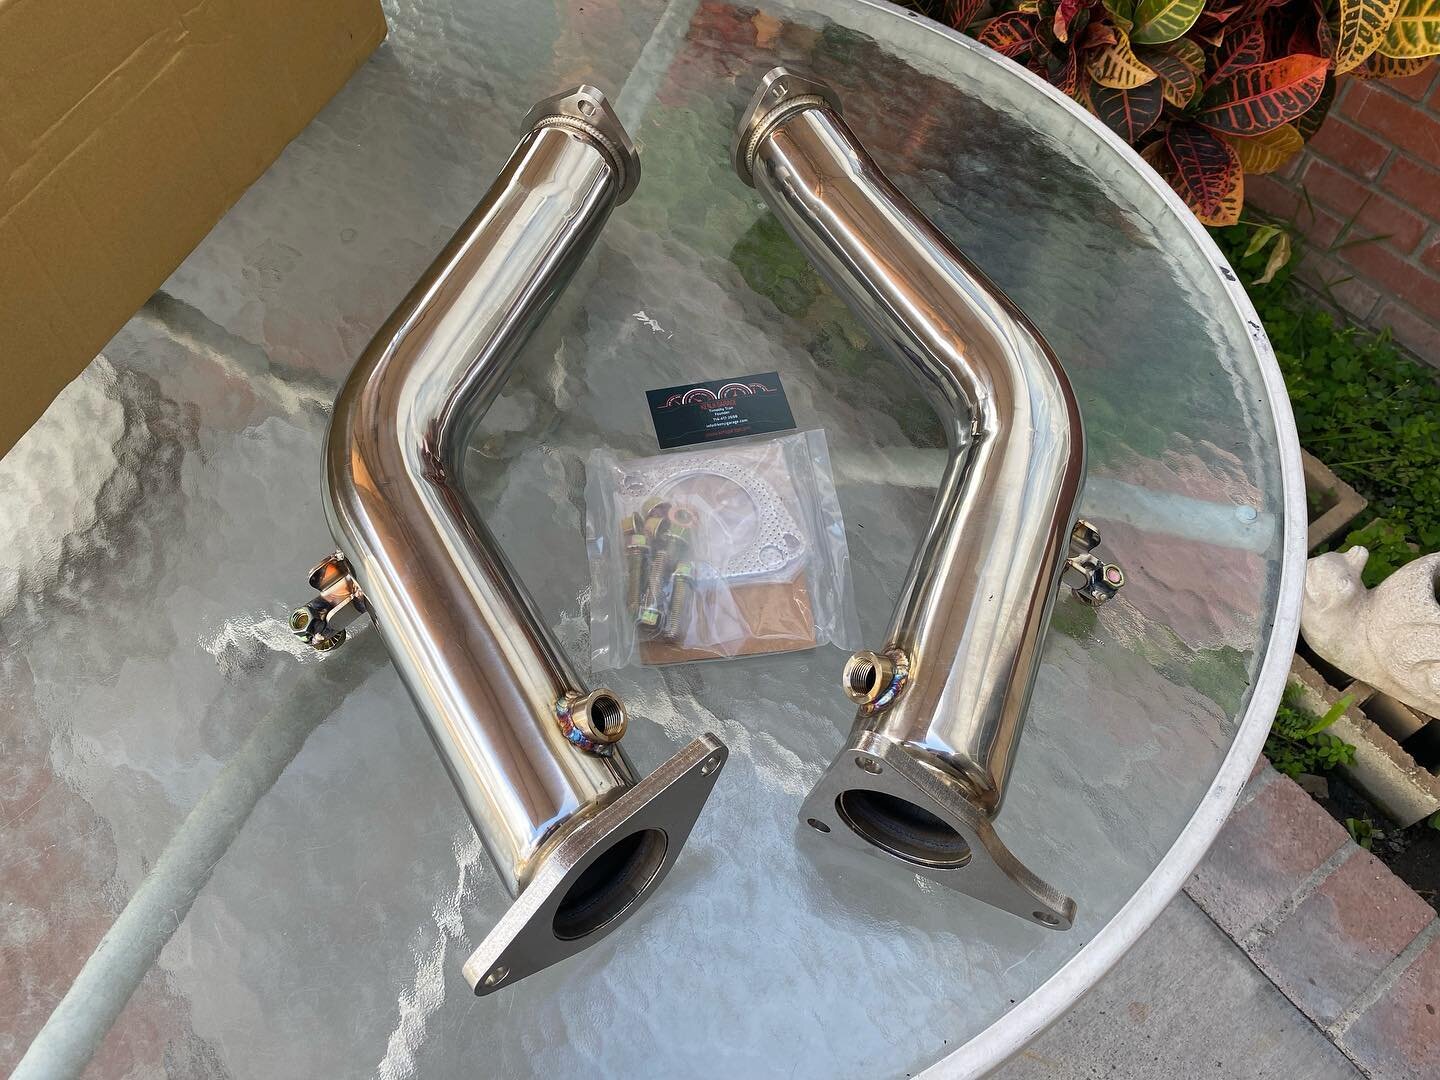 Kenji Garage Lower Performance Pipes for 16+ Infiniti Q50 / 17+ Infiniti Q60 / 23+ Nissan Z

🏎 Aftermarket Performance Parts
💰Financing available
📧 info@kenjigarage.com
📲 714-417-2698
🌎 Ship World Wide
💻 www.kenjigarage.com

#nissanz #z #400z #